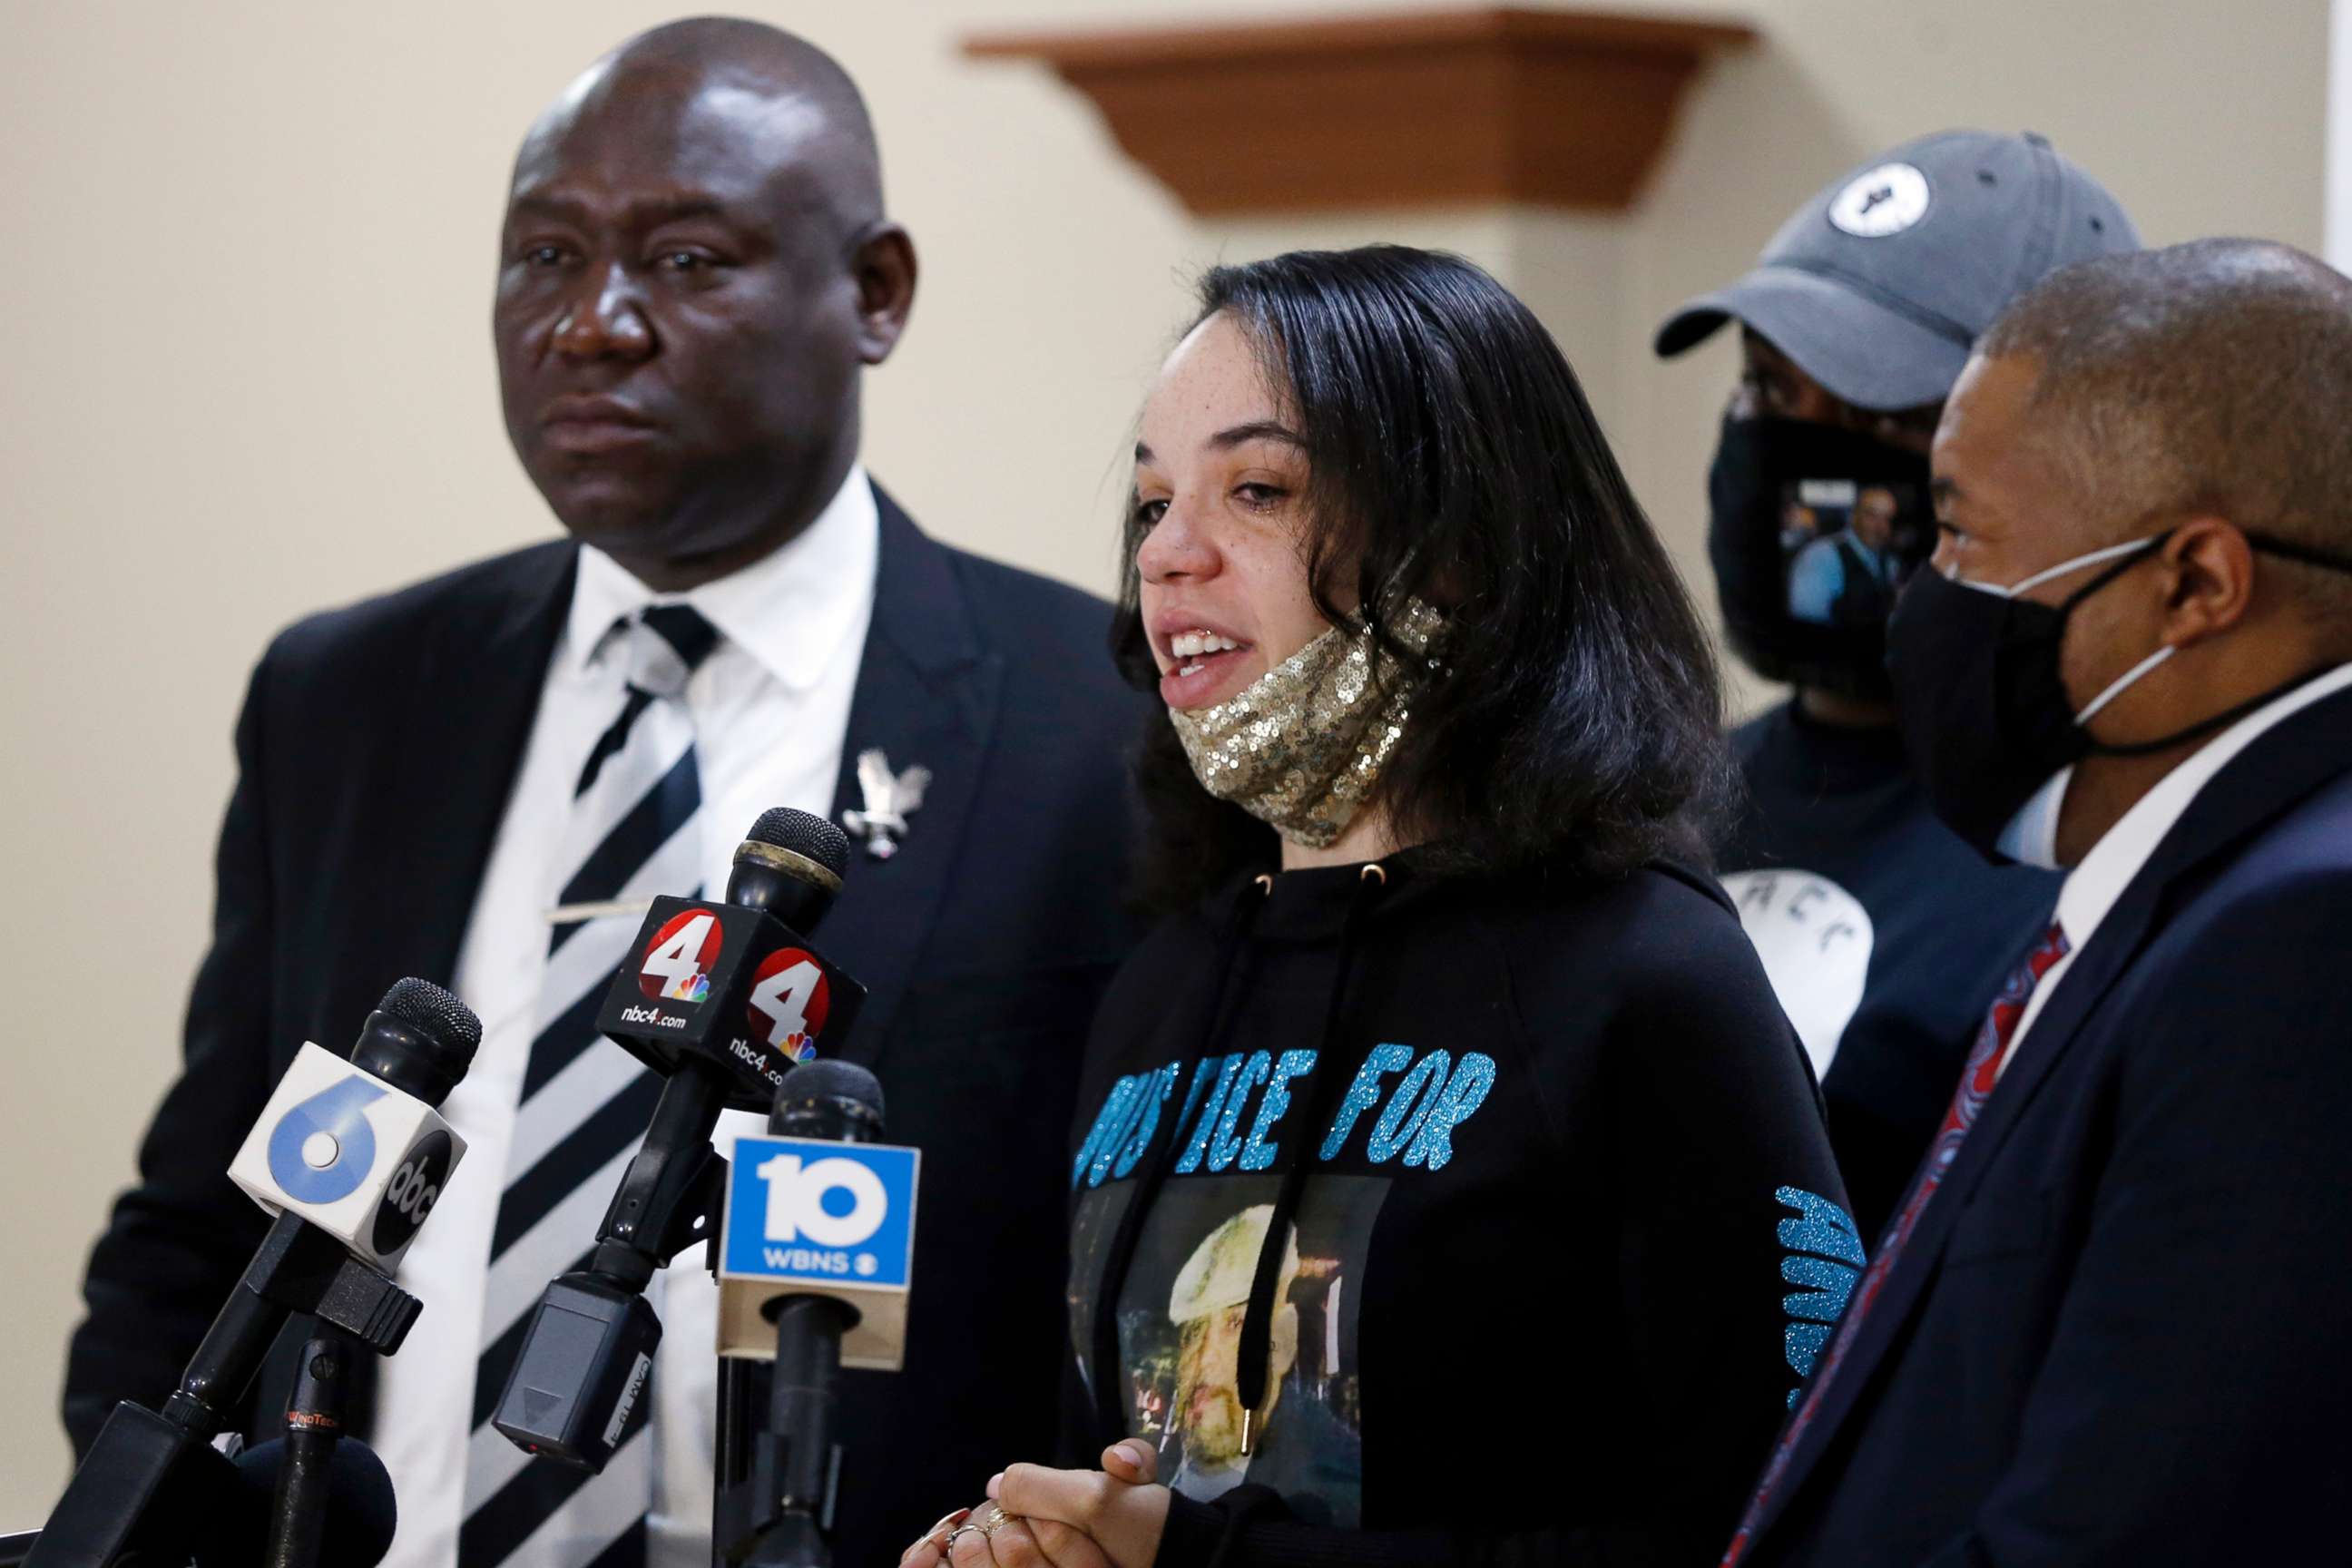 PHOTO: Karissa Hill, daughter of Andre Hill, speaks during a news conference about the indictment of Columbus Police Officer Adam Coy in the shooting death of her father in Columbus, Ohio, Feb. 4, 2021.